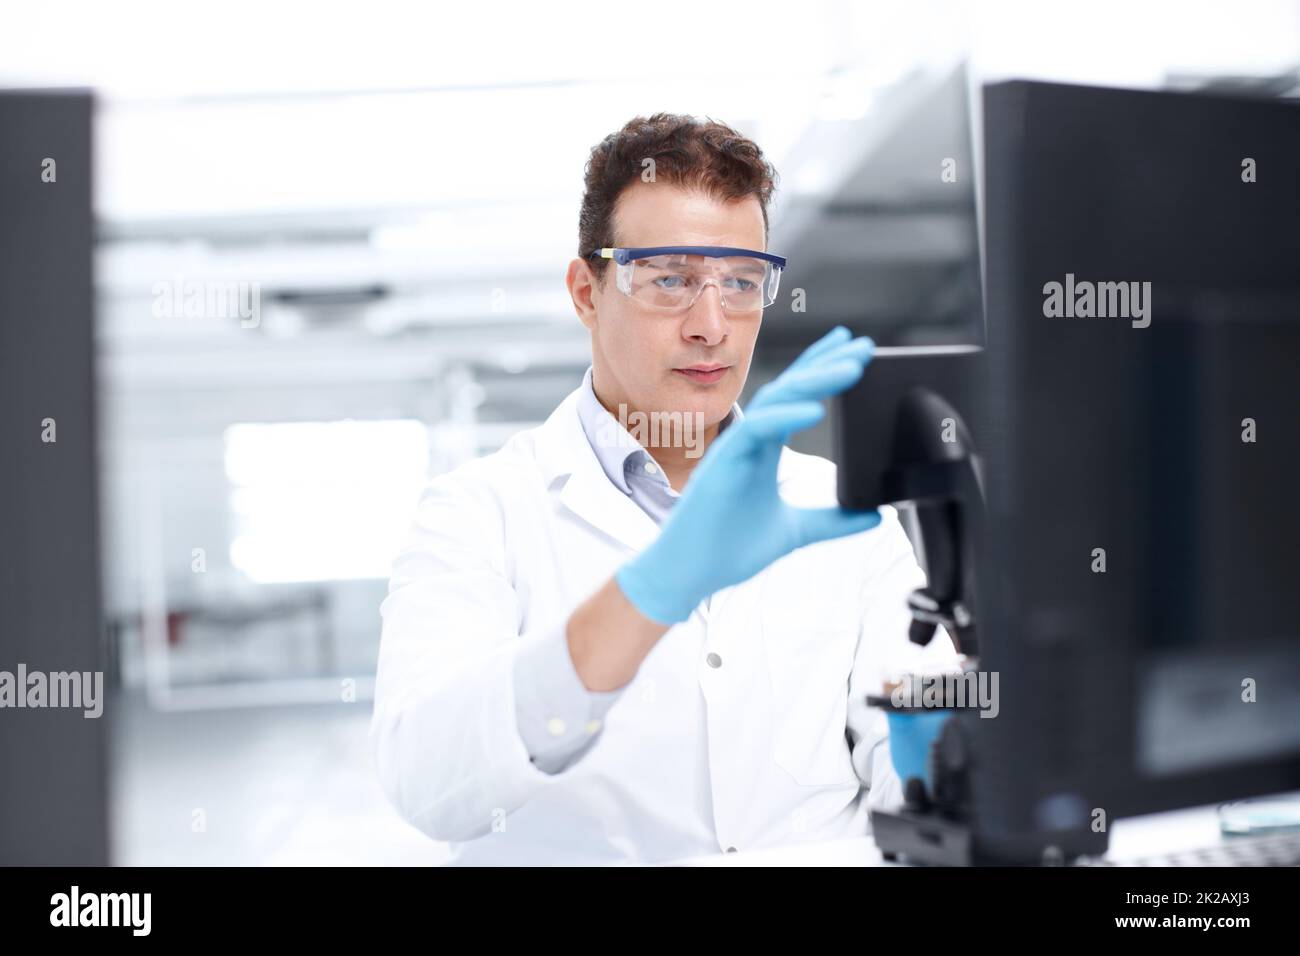 Making adjustments. A scientist looking intently at a microscope while wearing safety glasses. Stock Photo